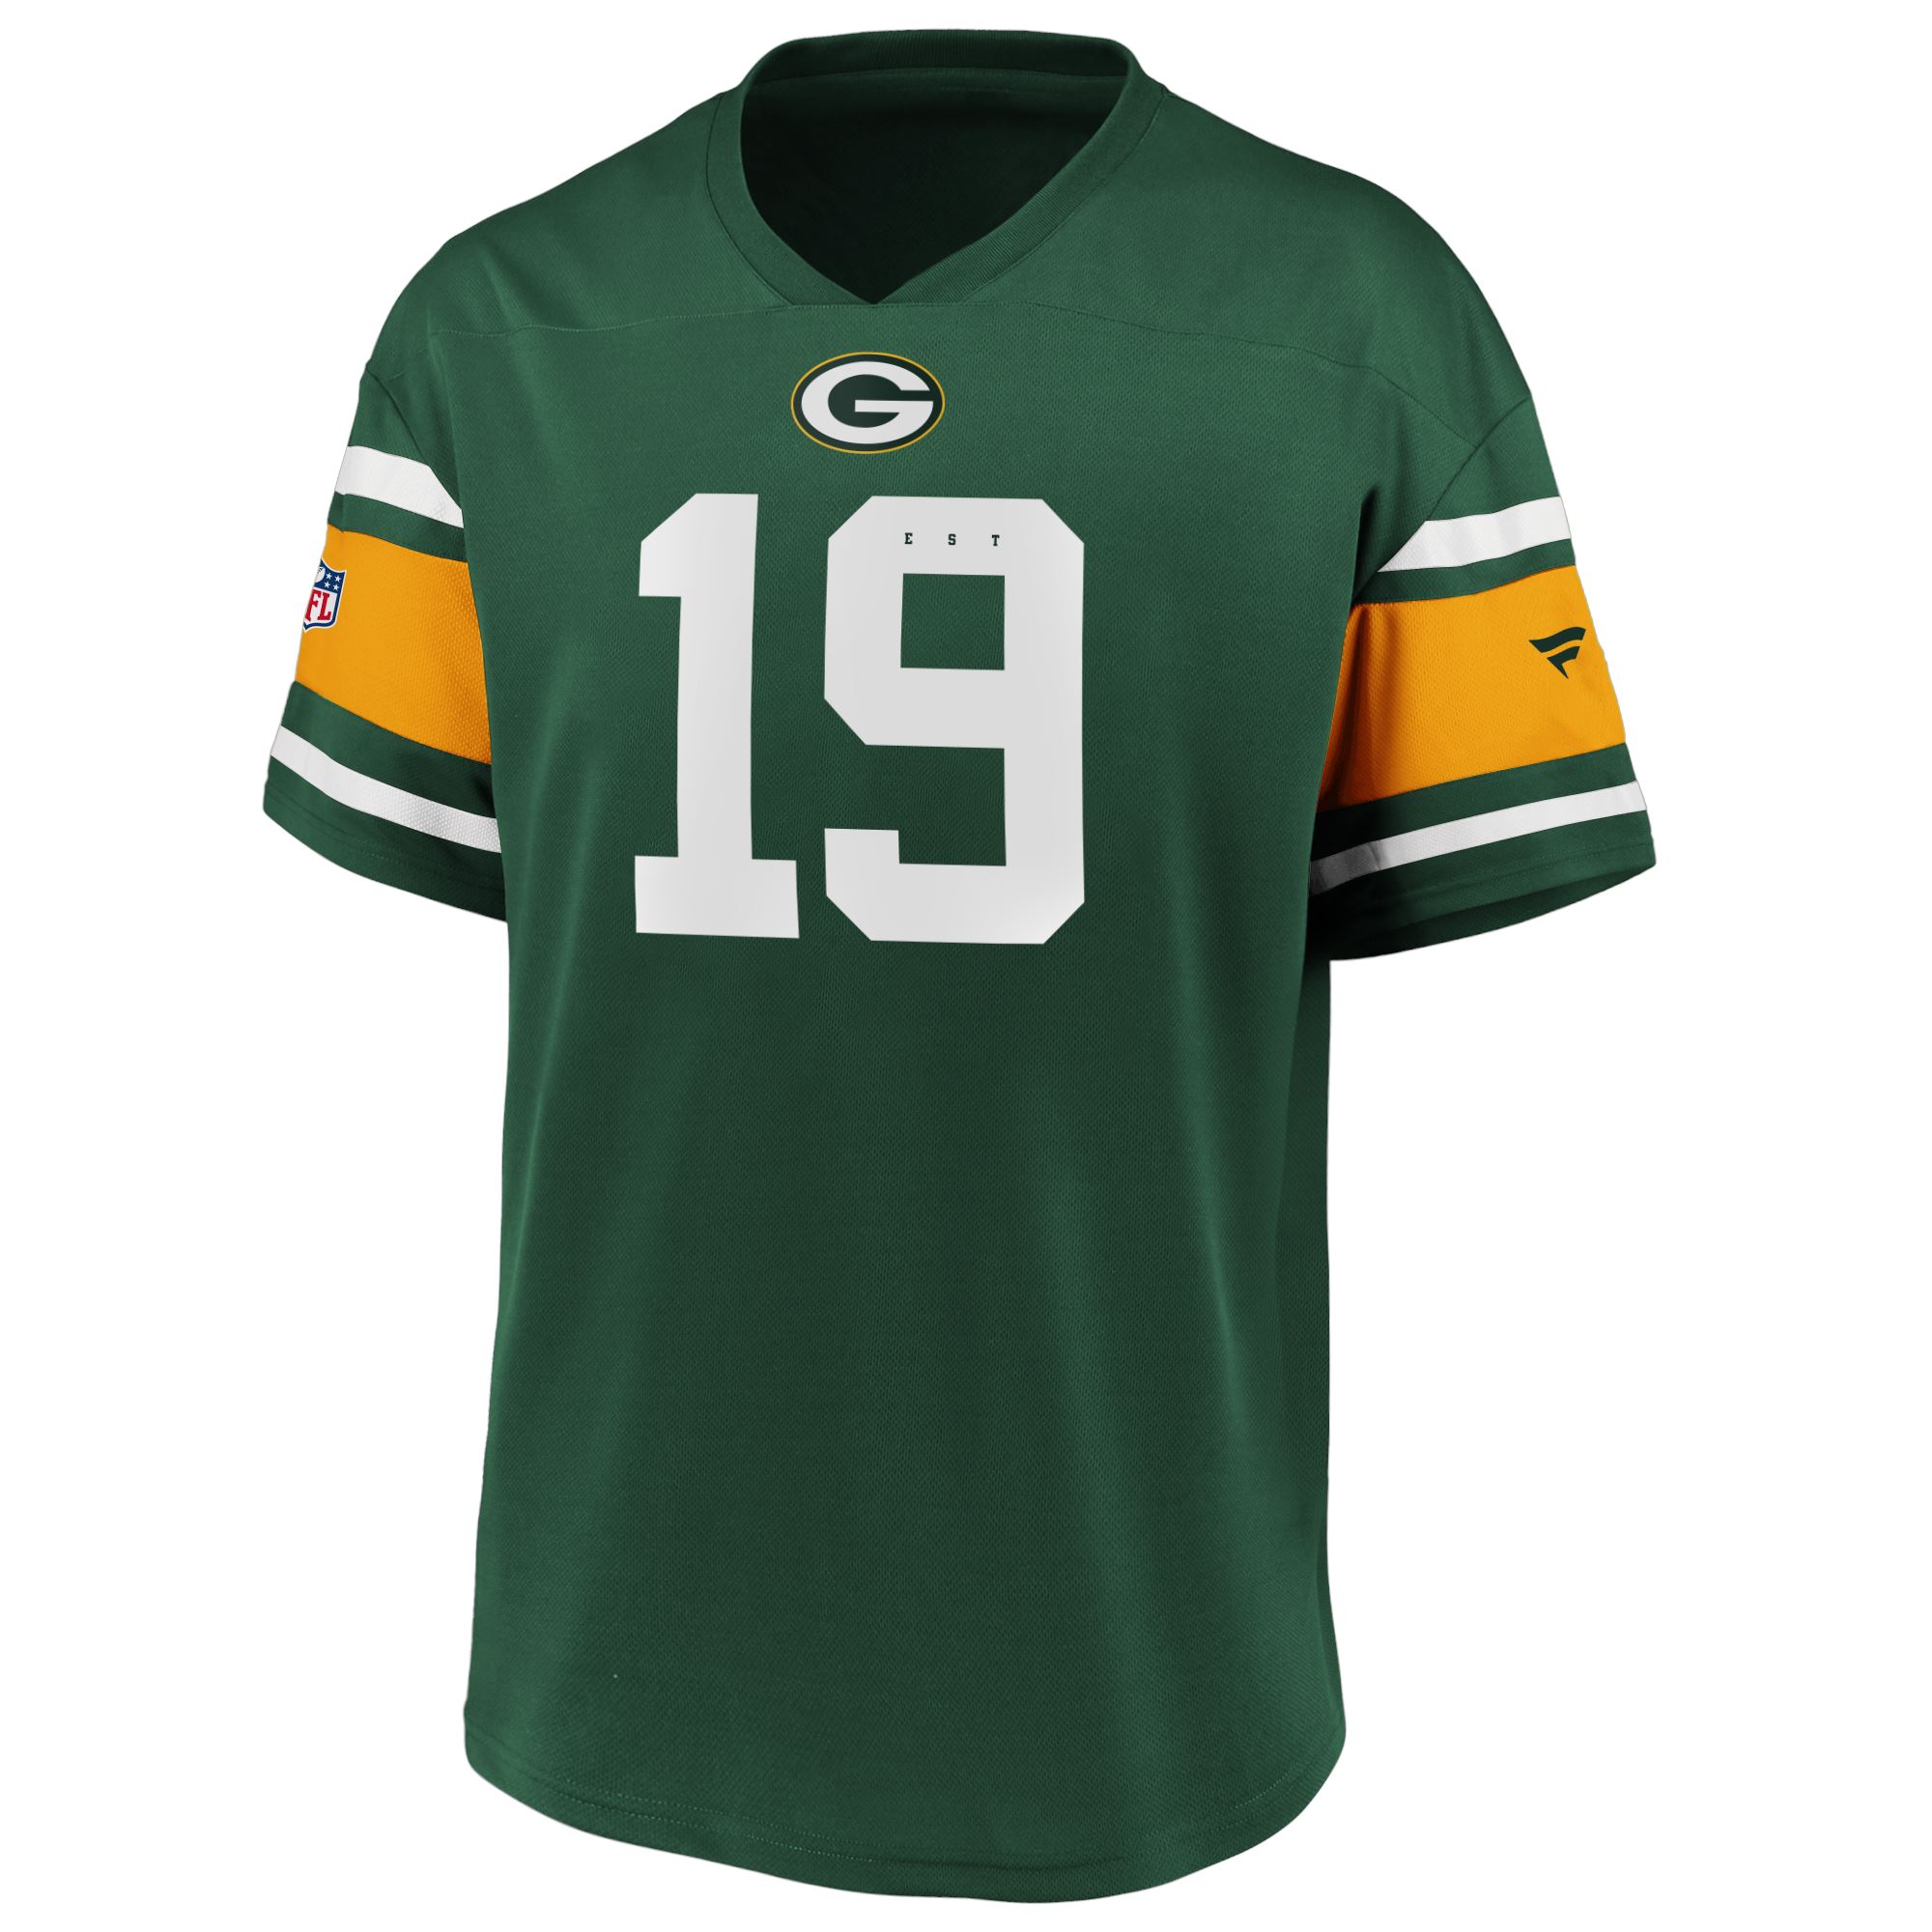 Green Bay Packers NFL Supporters Jersey Fanatics